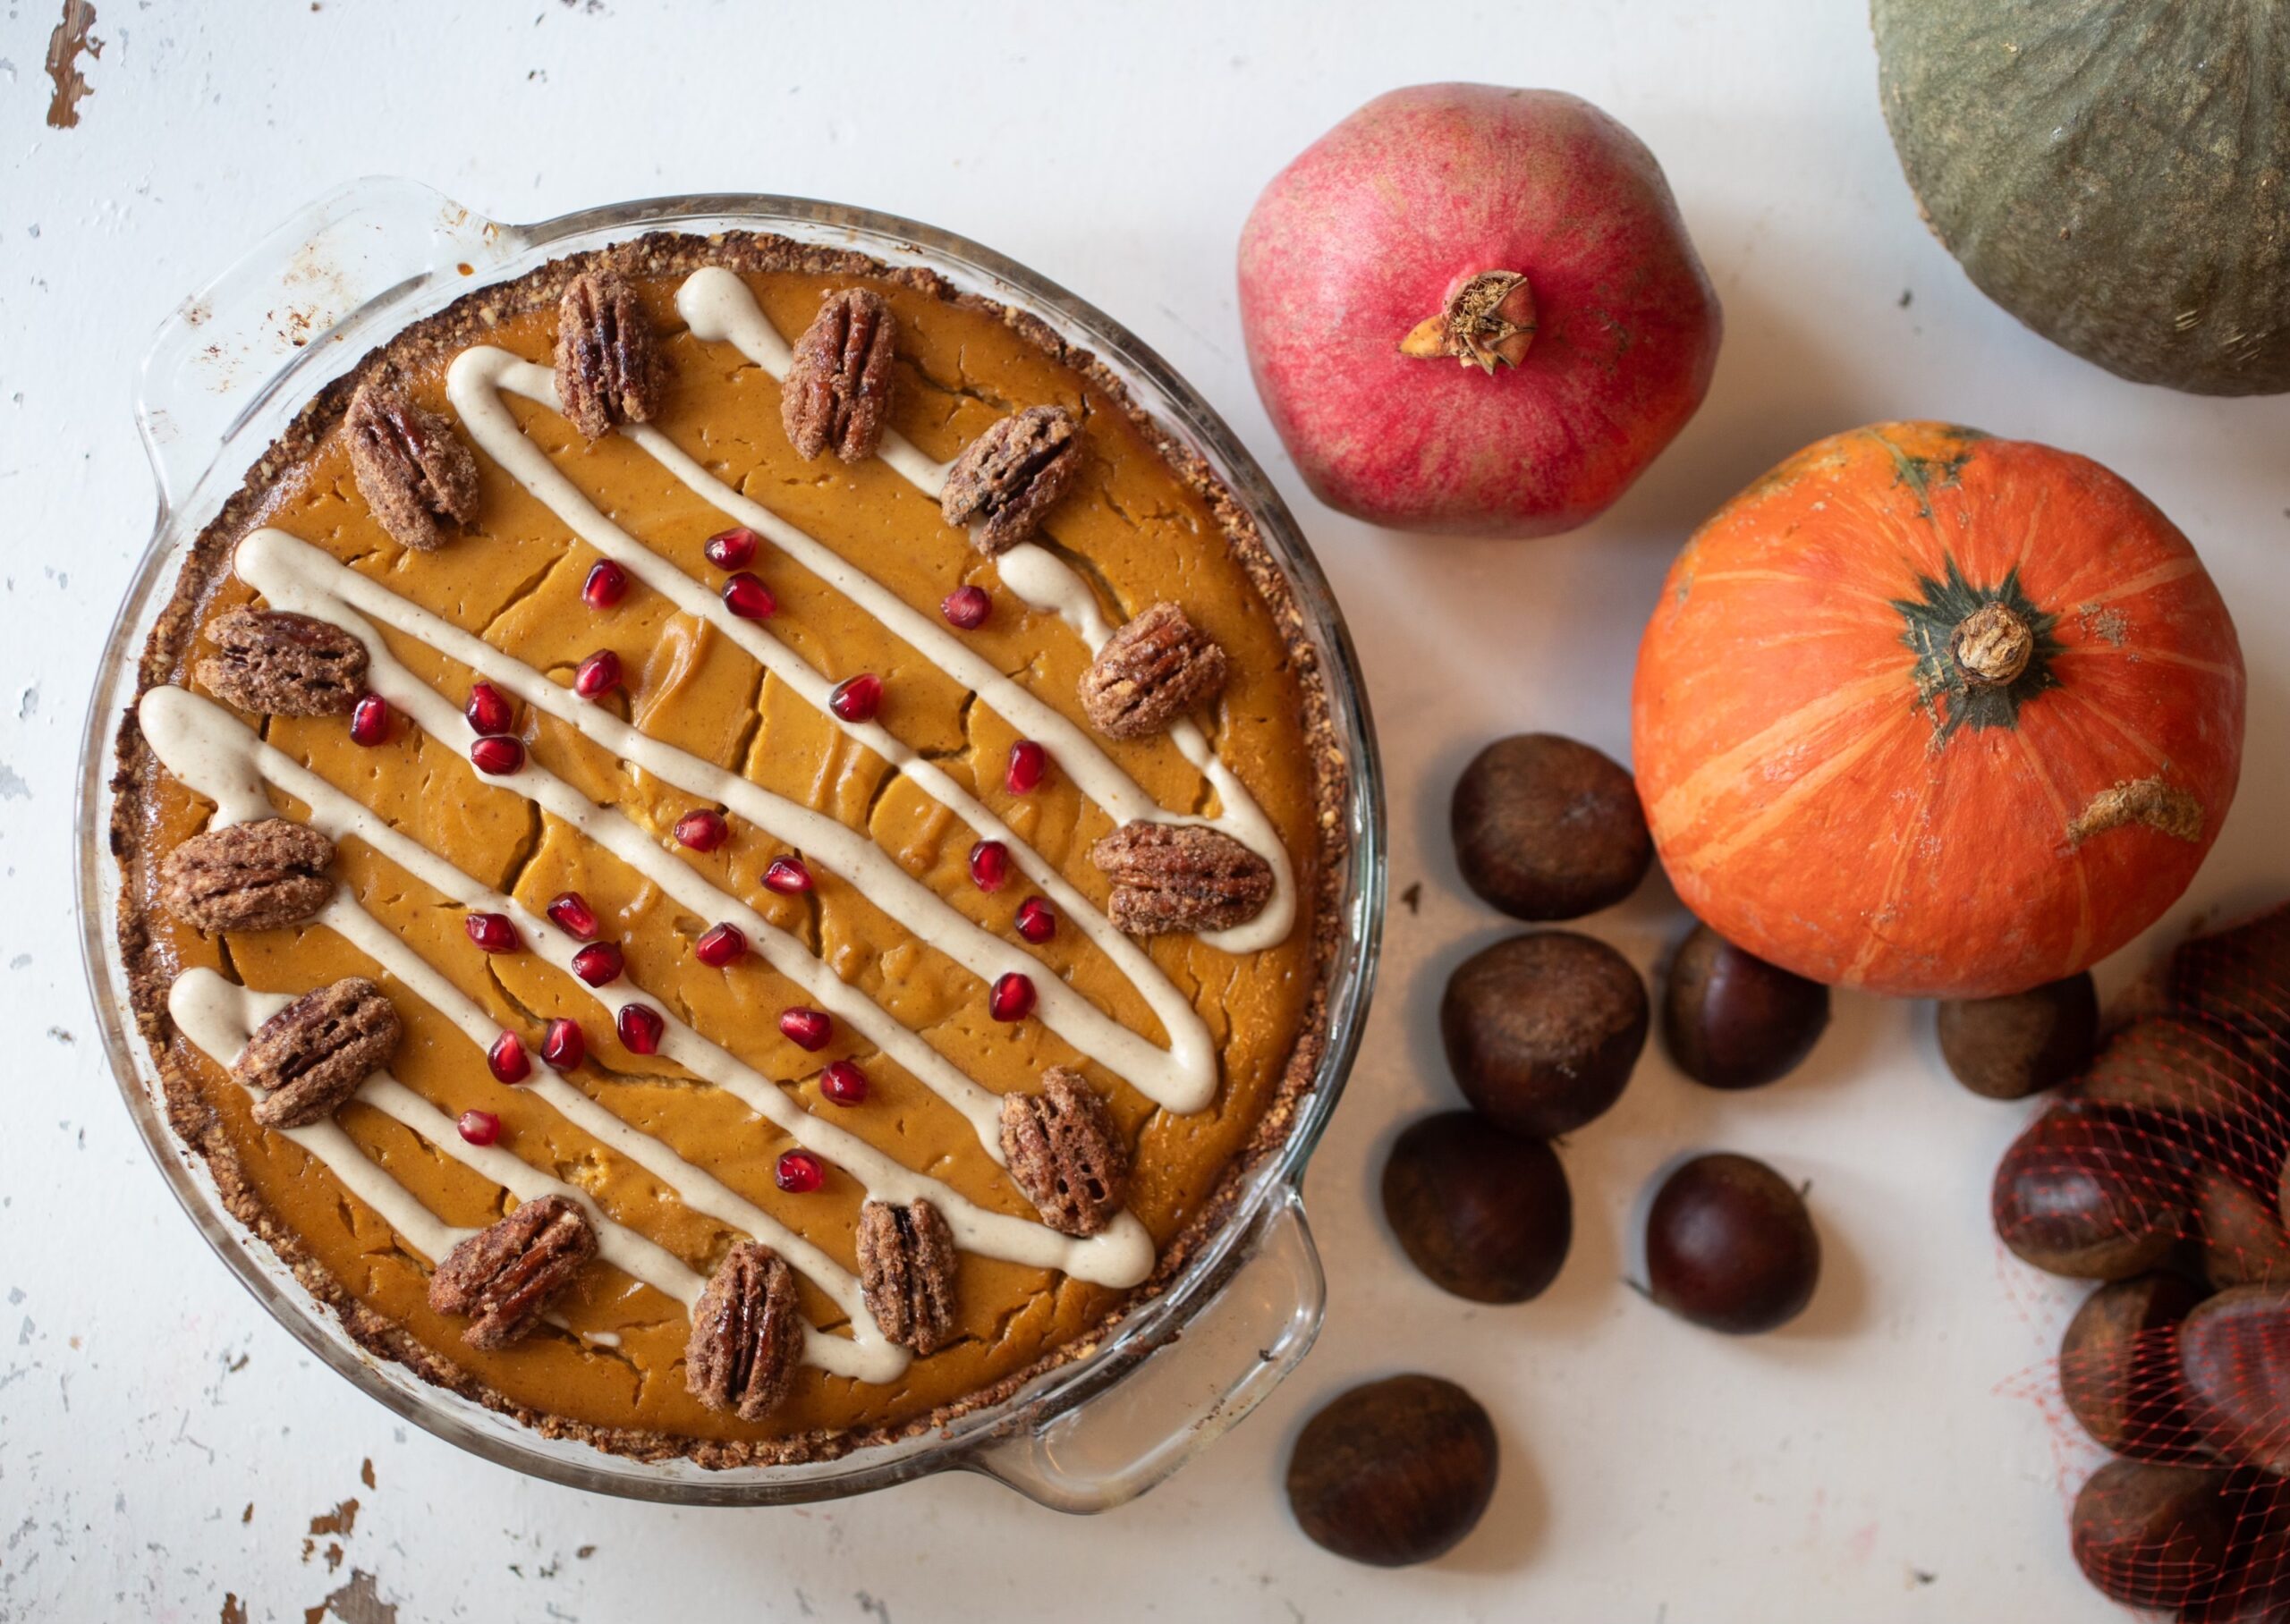 Featured image for “Easy Peasy Pumpkin Pie in an Oatmeal Cookie Crust”